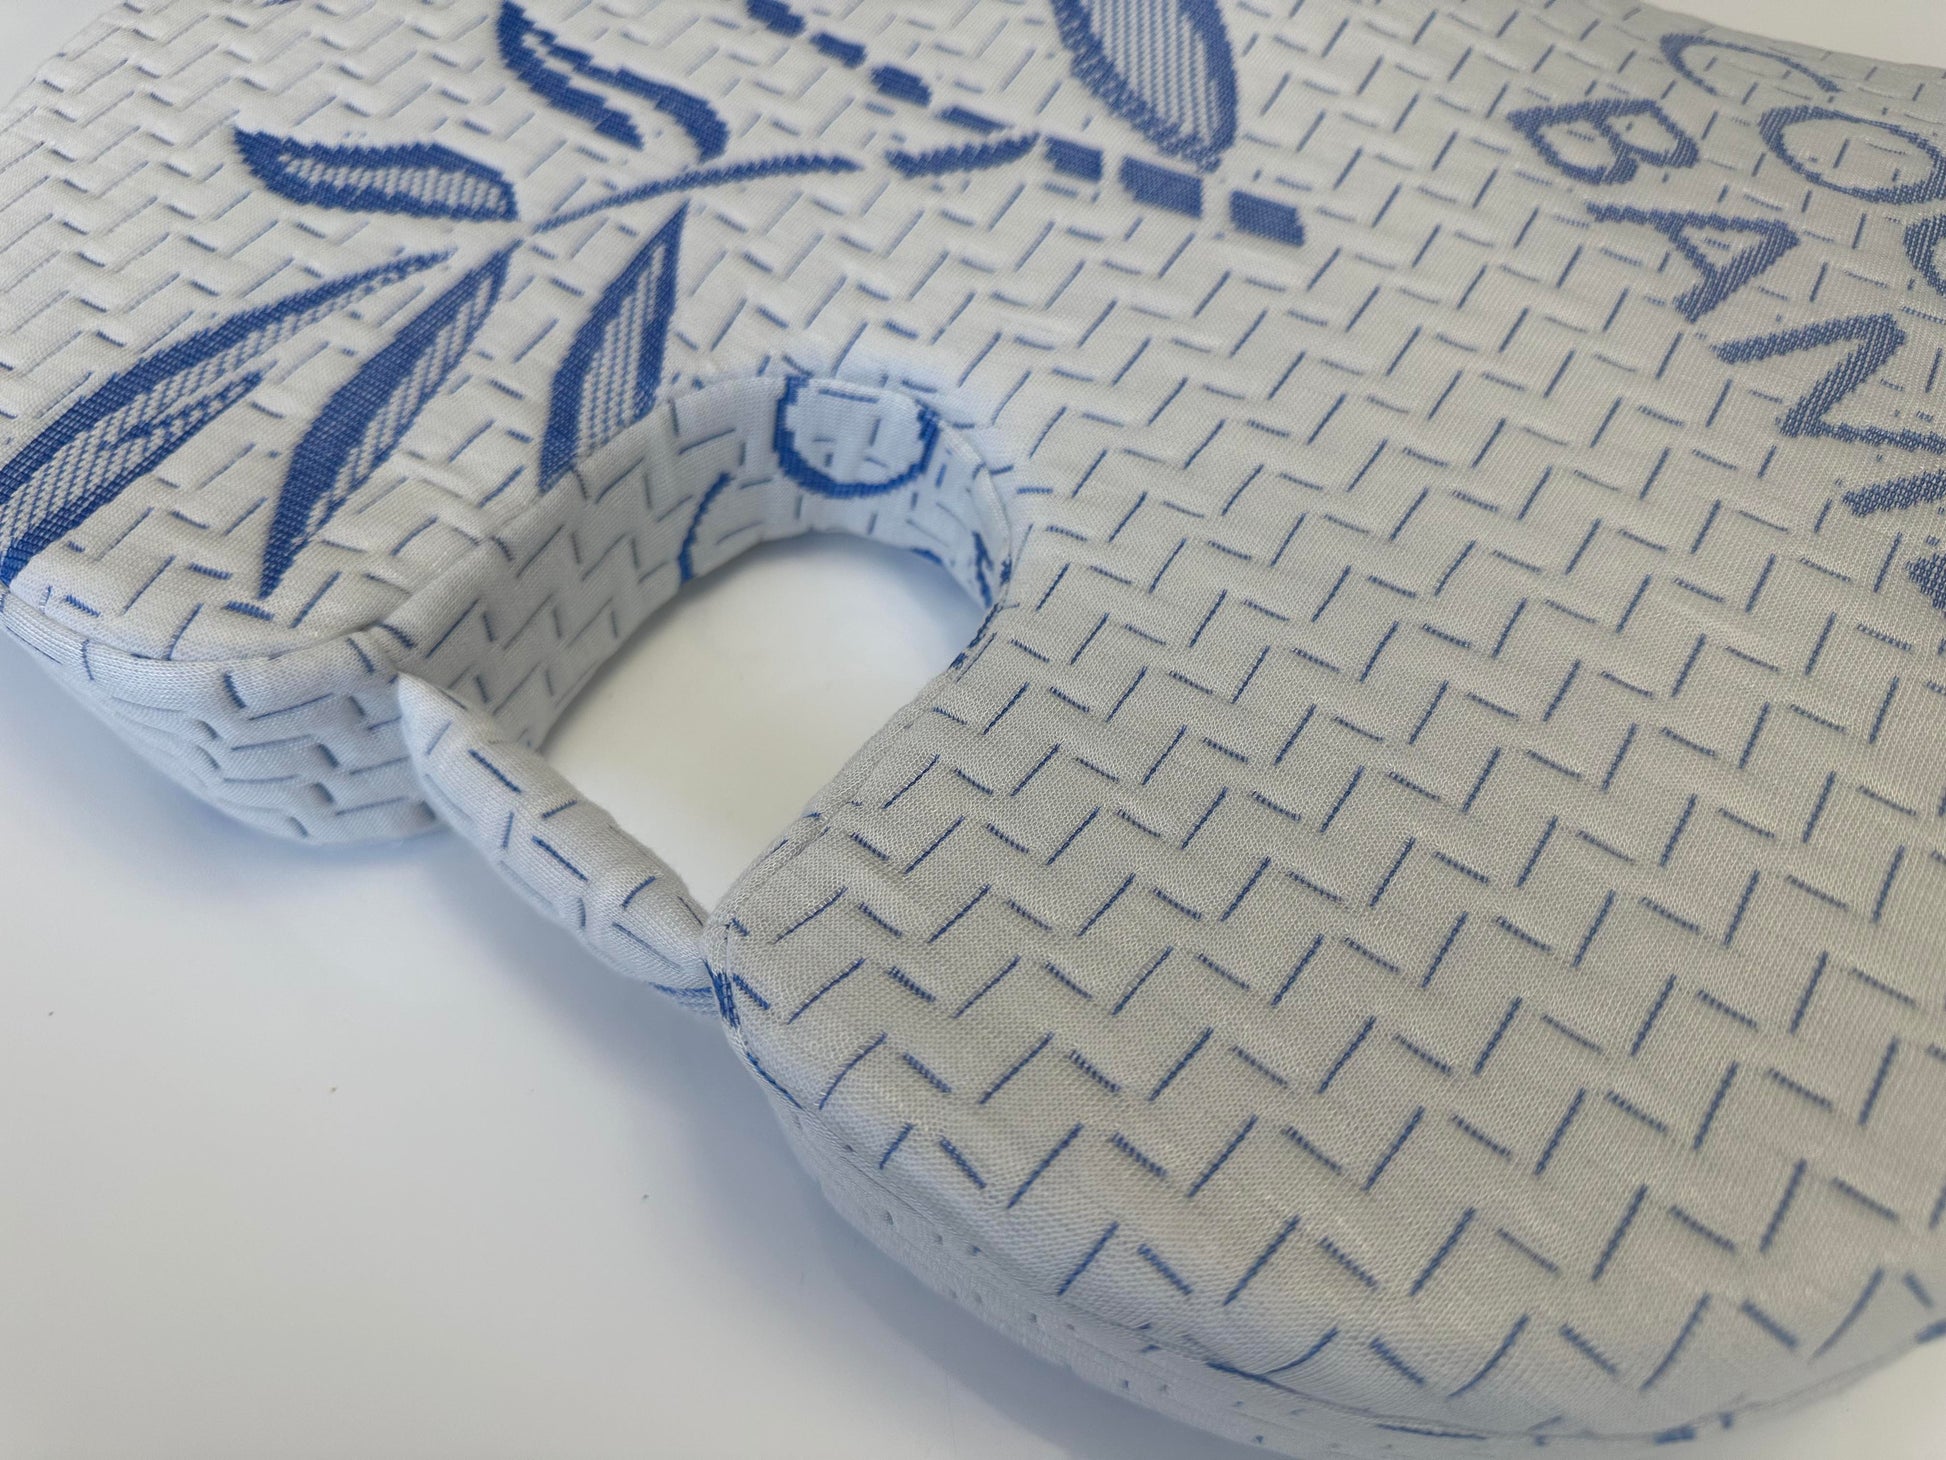 Seat Cushion Bamboo Pillow are manufactured from the memory foam and covered in our unique 40% Bamboo 60% rayon fabric. Seat Cushion Bamboo Pillow is comfortable, provide ultimate support, orthopedic, breathable